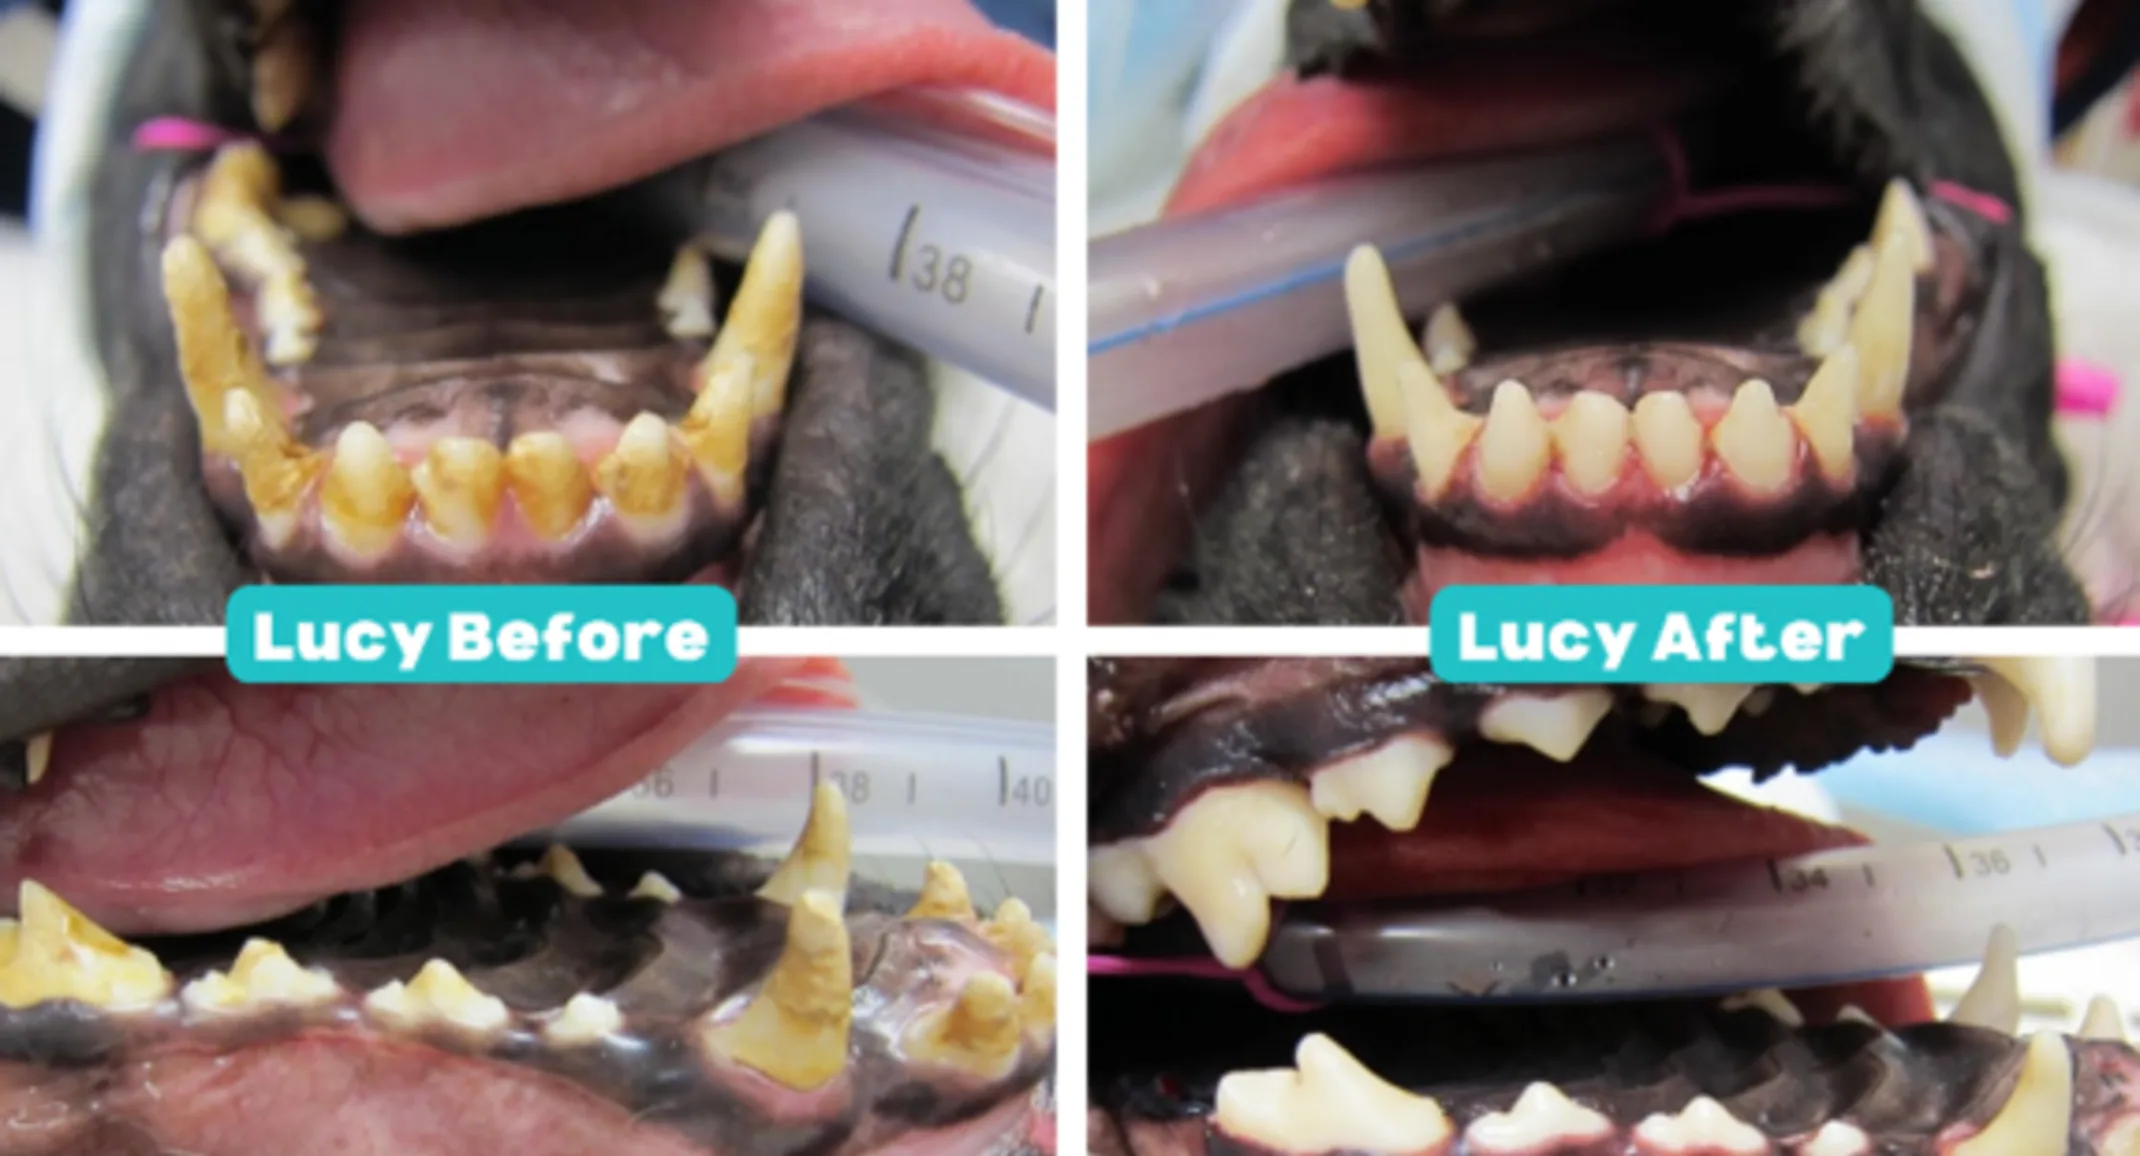 Lucy's before and after dental images